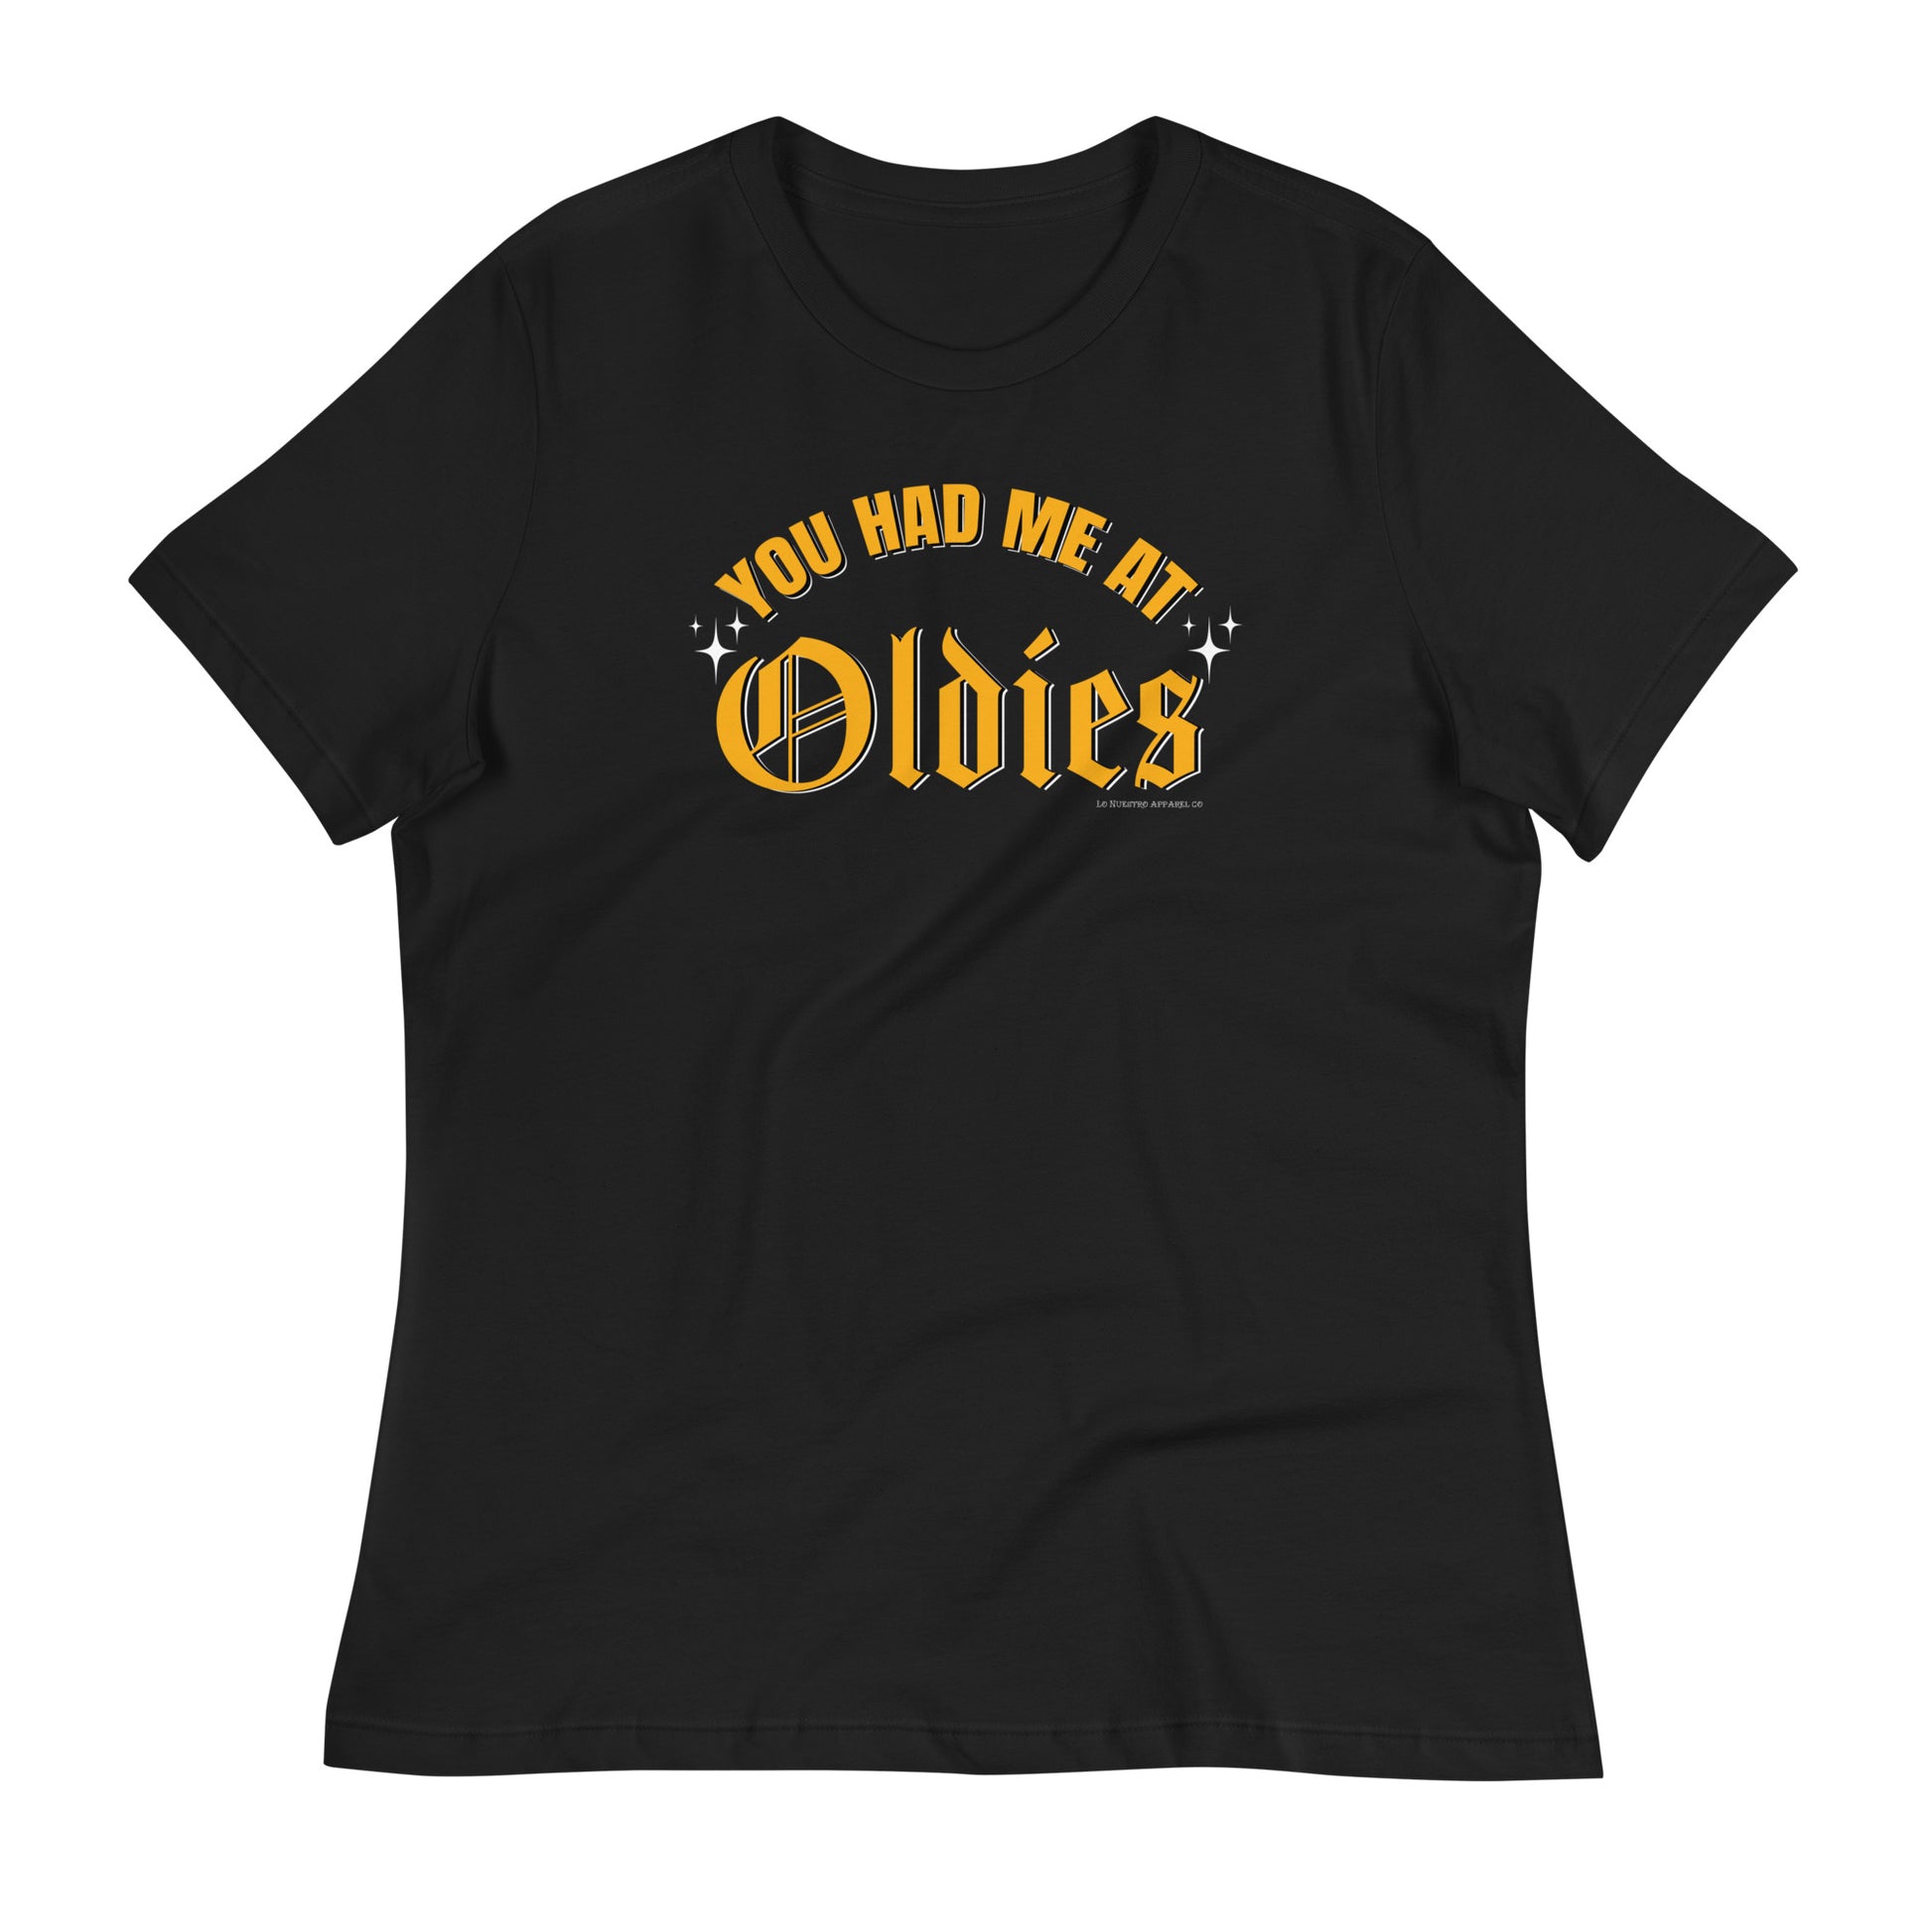 You Had Me at Oldies Women's T-Shirt with bold yellow old English lettering on black, perfect for Chicana style.